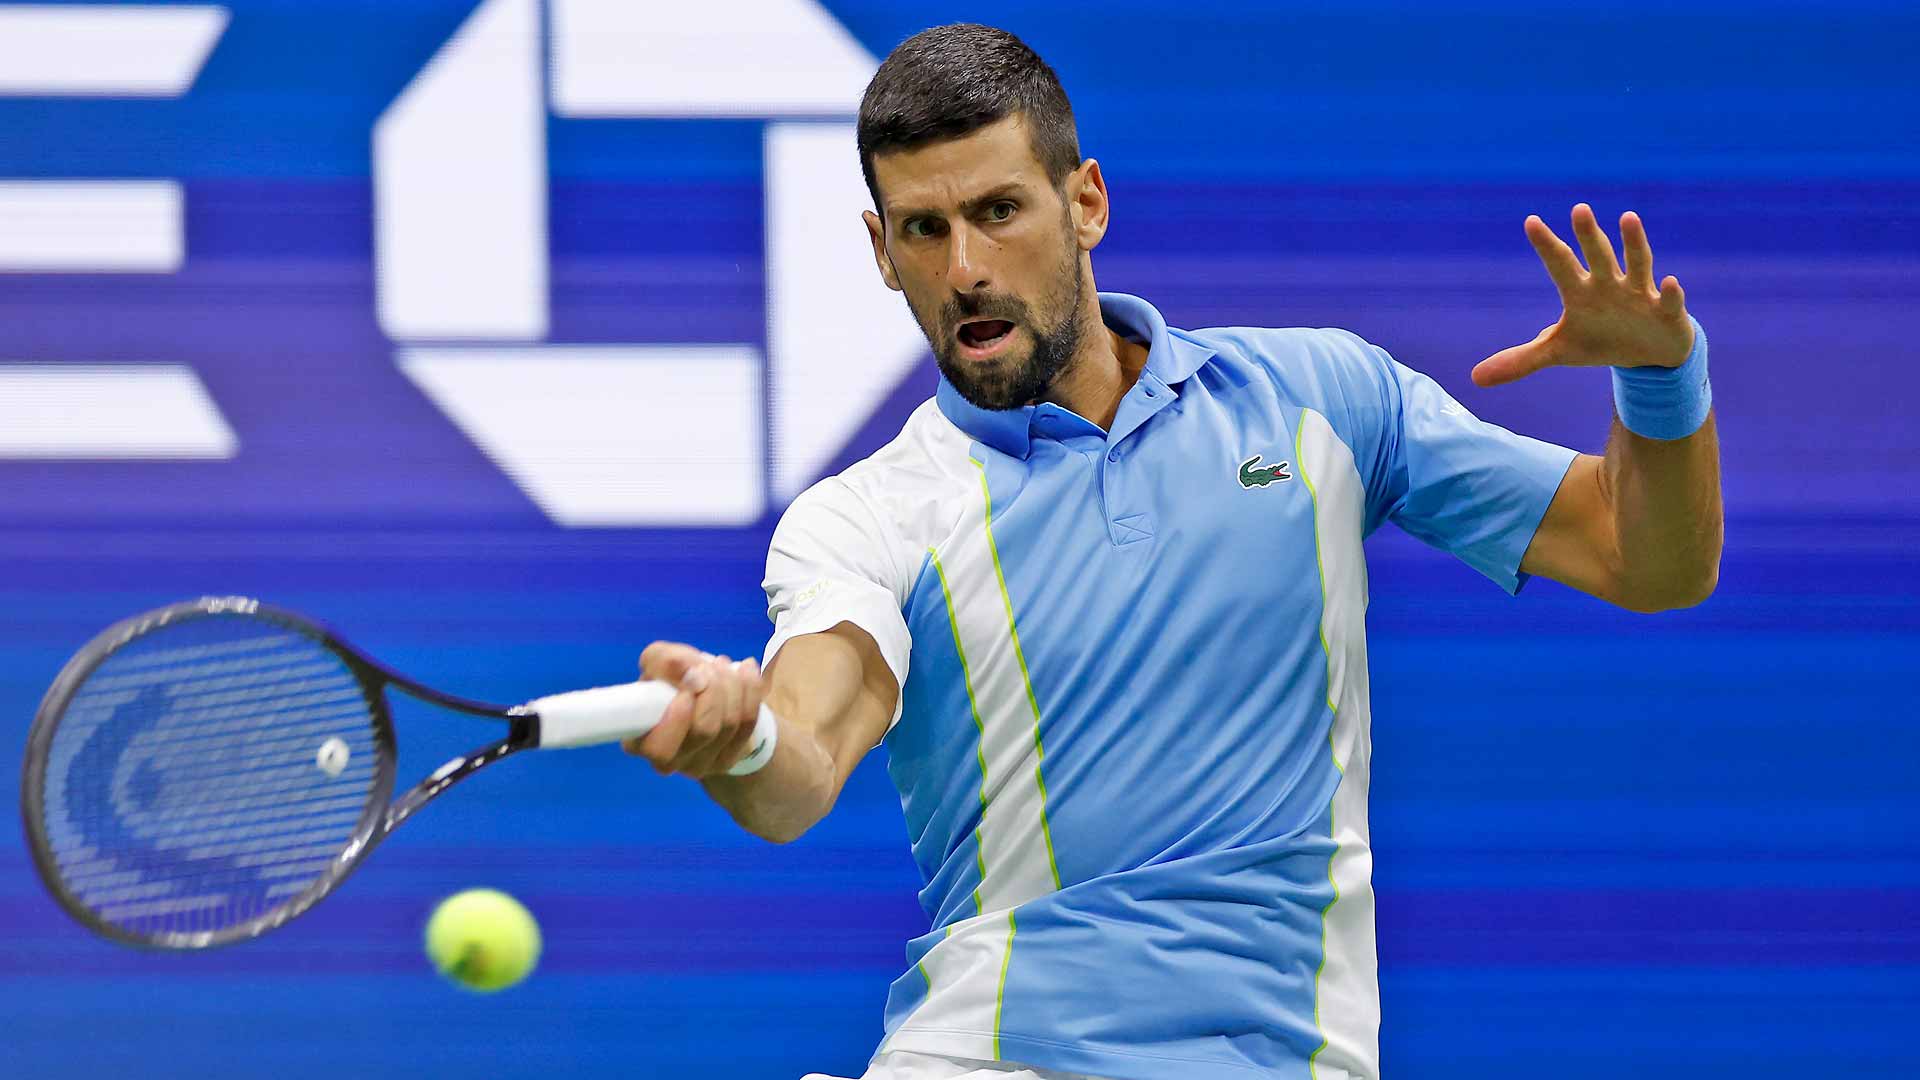 Novak Djokovic is chasing his record-extending 24th major title at the US Open.